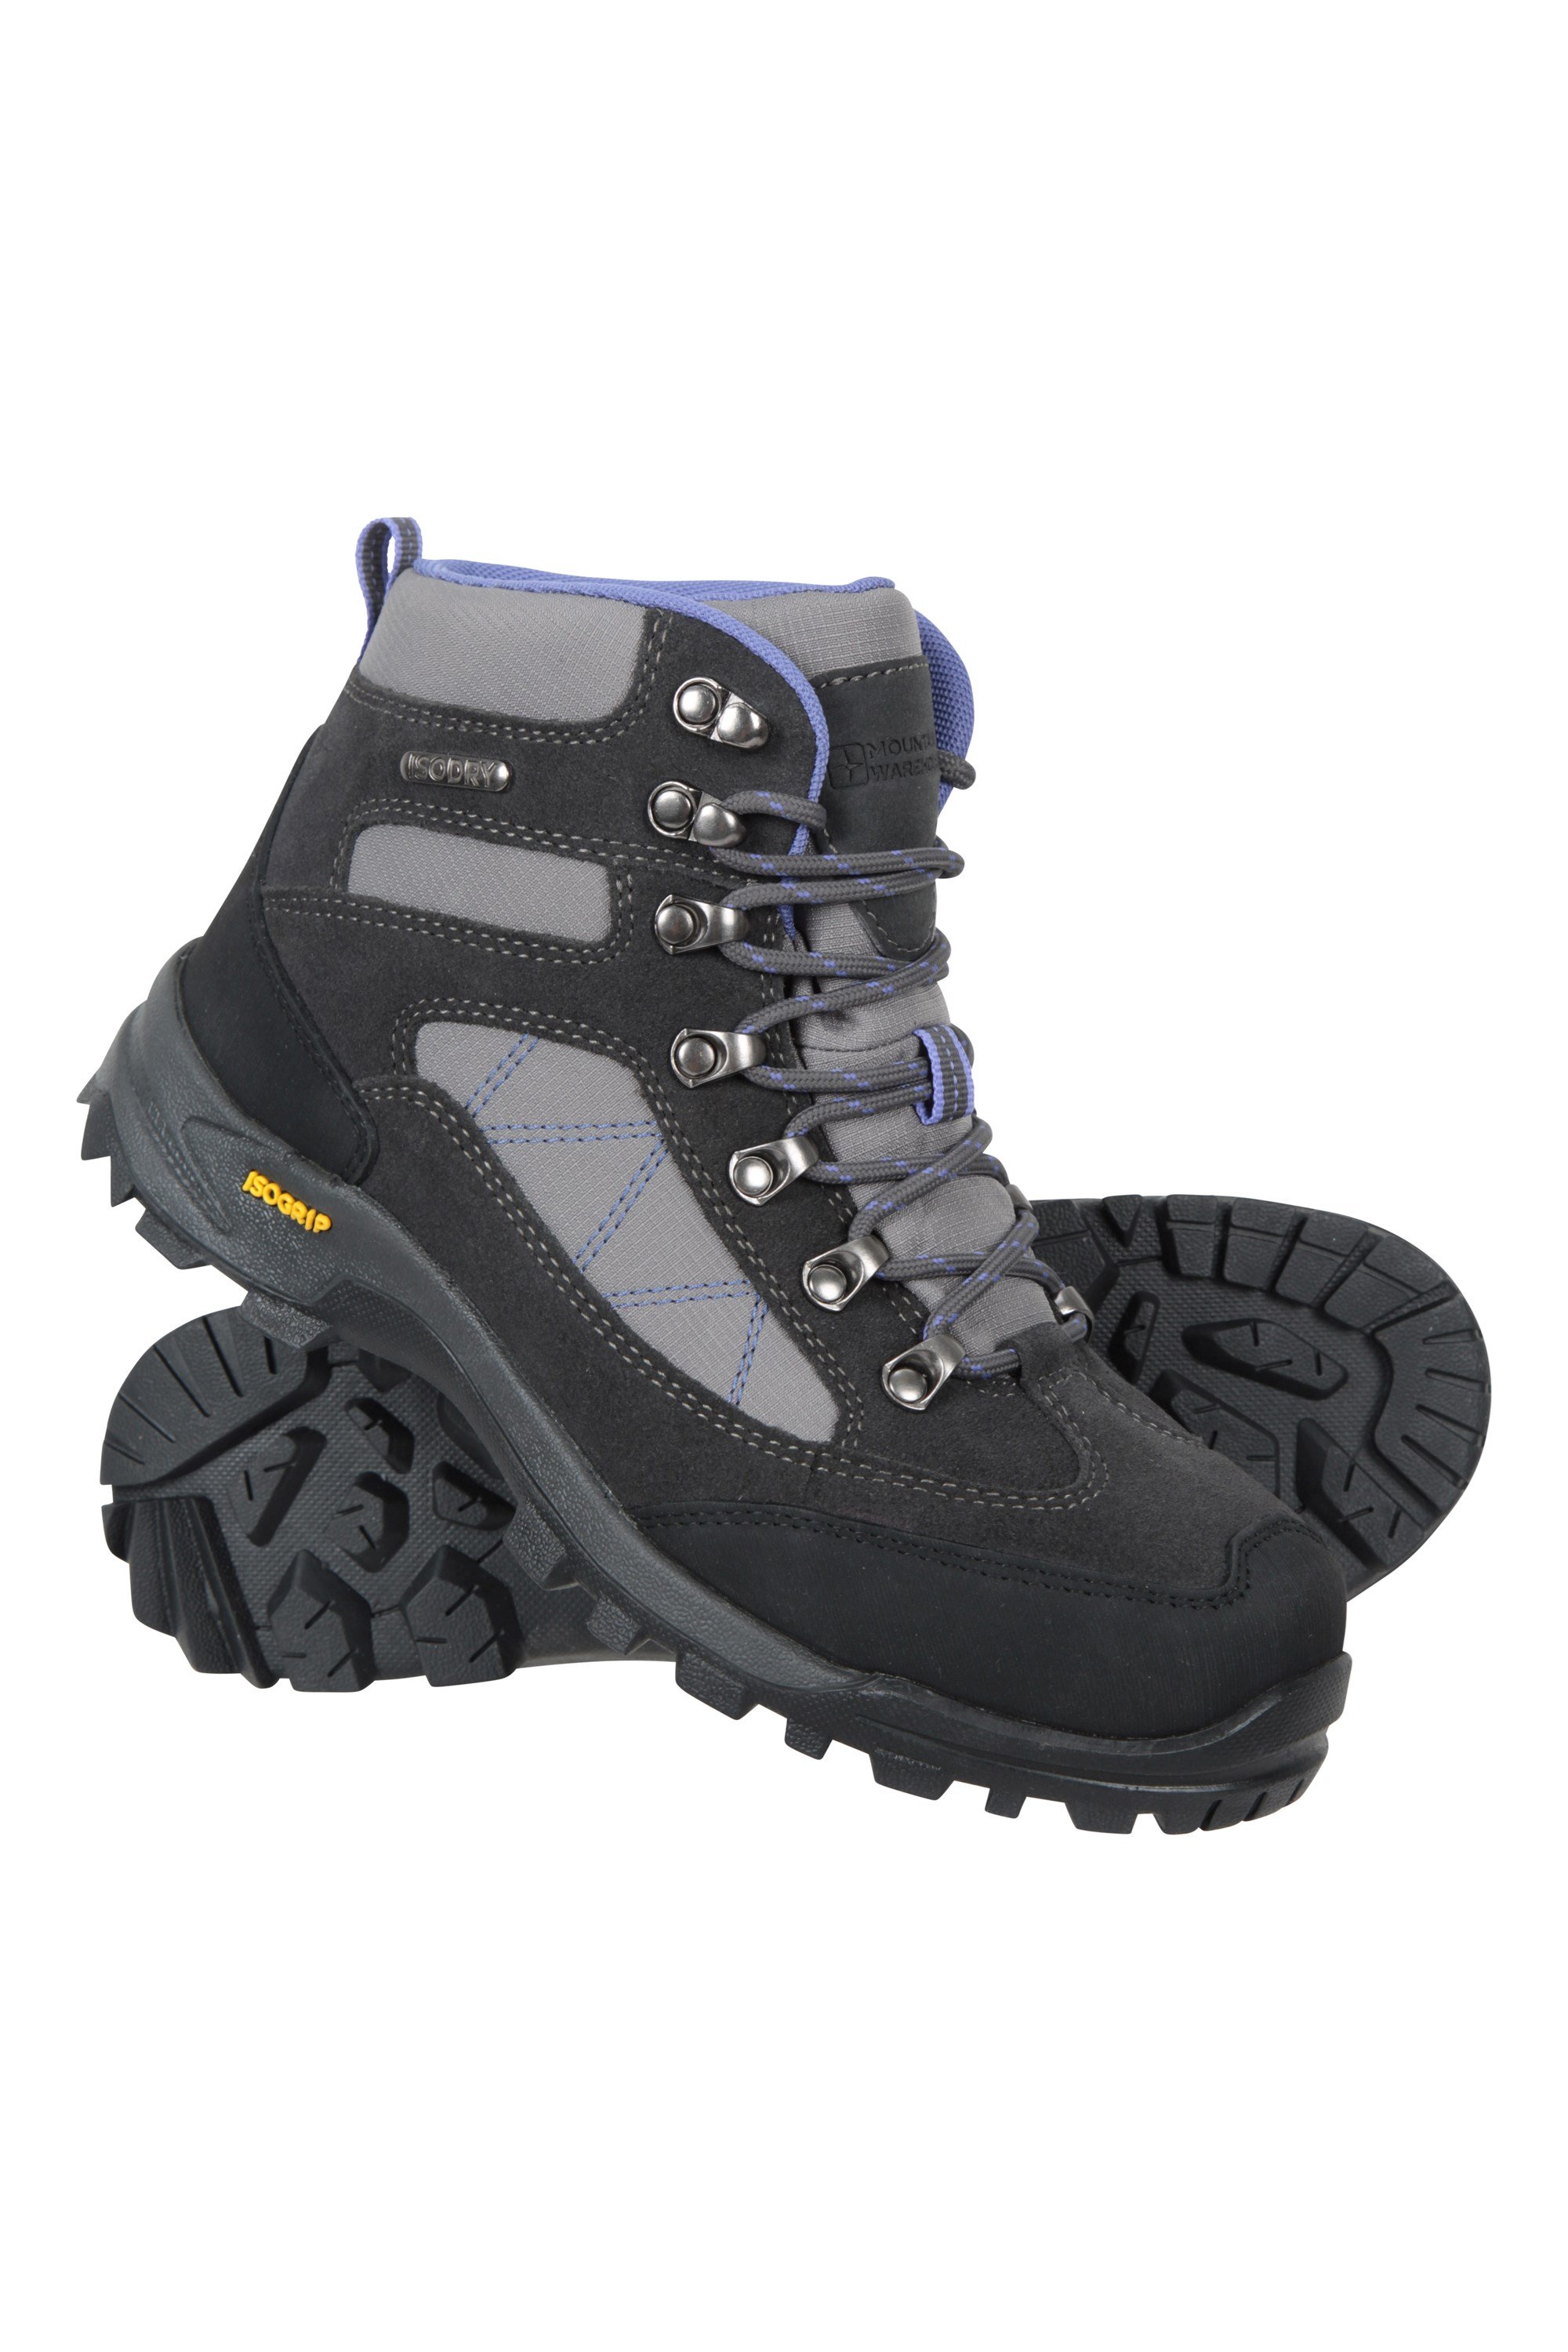 Extreme Storm Womens Waterproof IsoGrip Boots - Grey